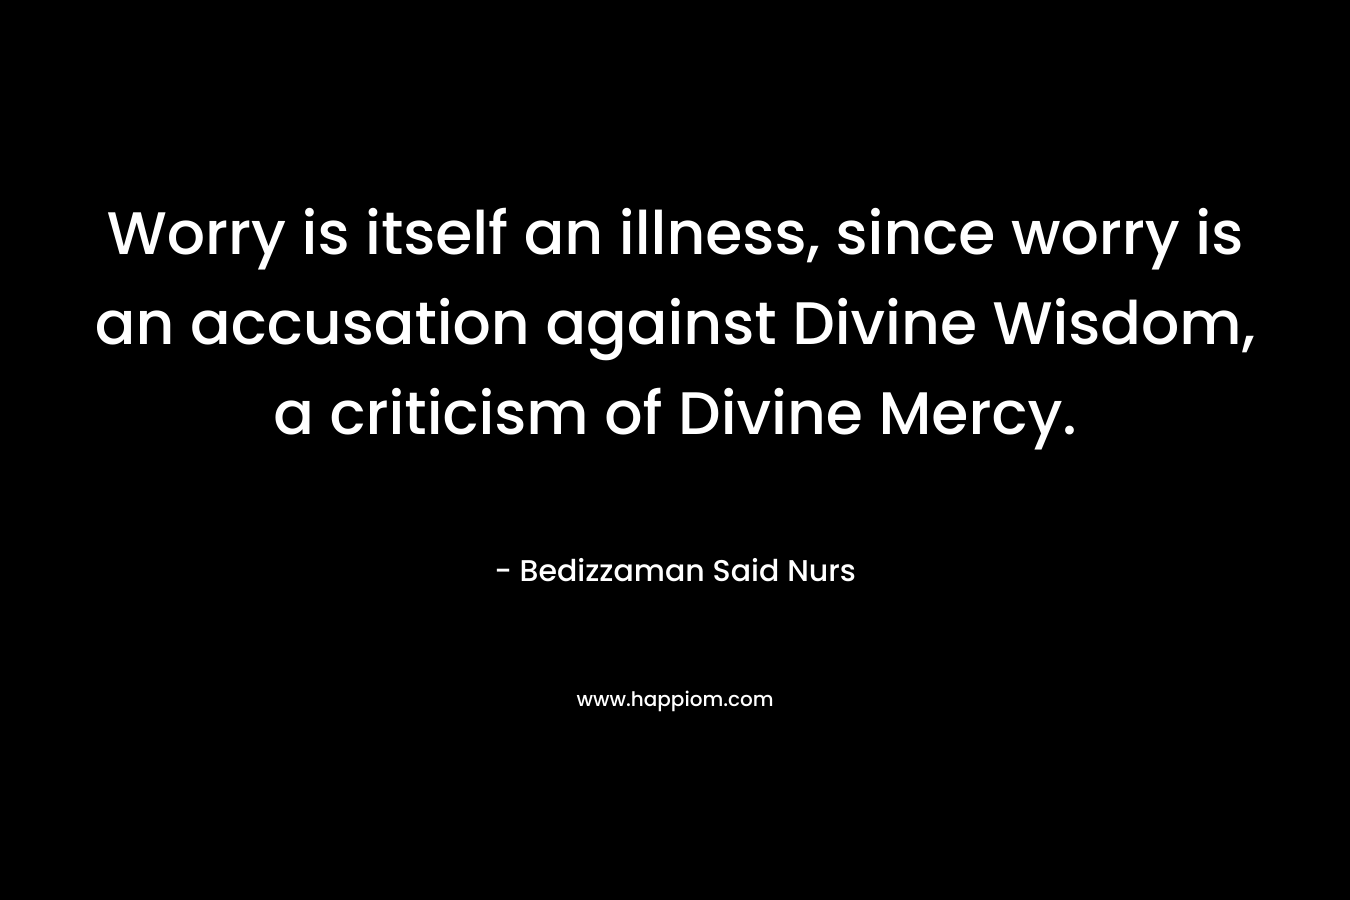 Worry is itself an illness, since worry is an accusation against Divine Wisdom, a criticism of Divine Mercy. – Bedizzaman Said Nurs